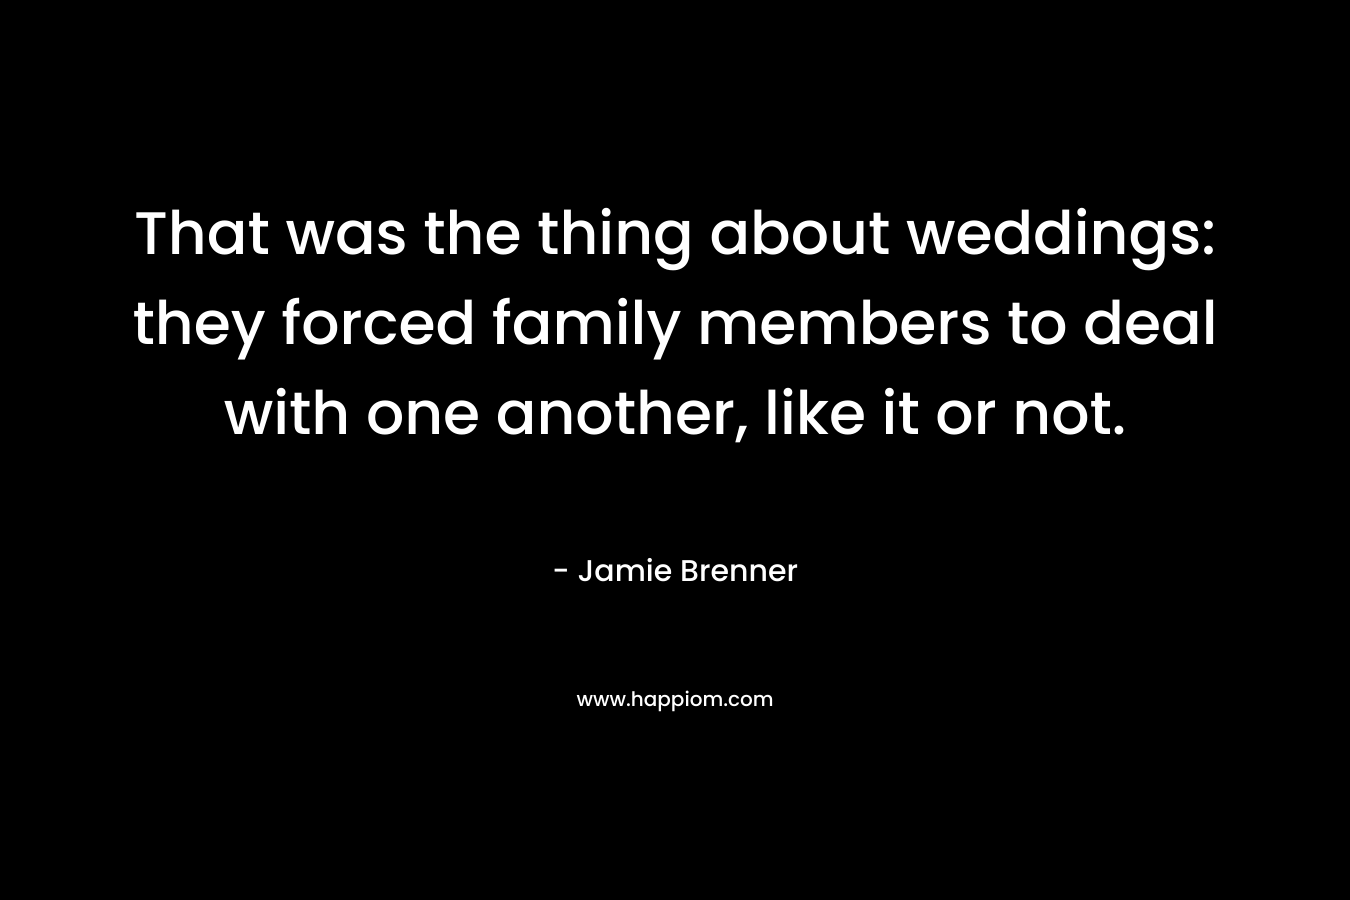 That was the thing about weddings: they forced family members to deal with one another, like it or not.